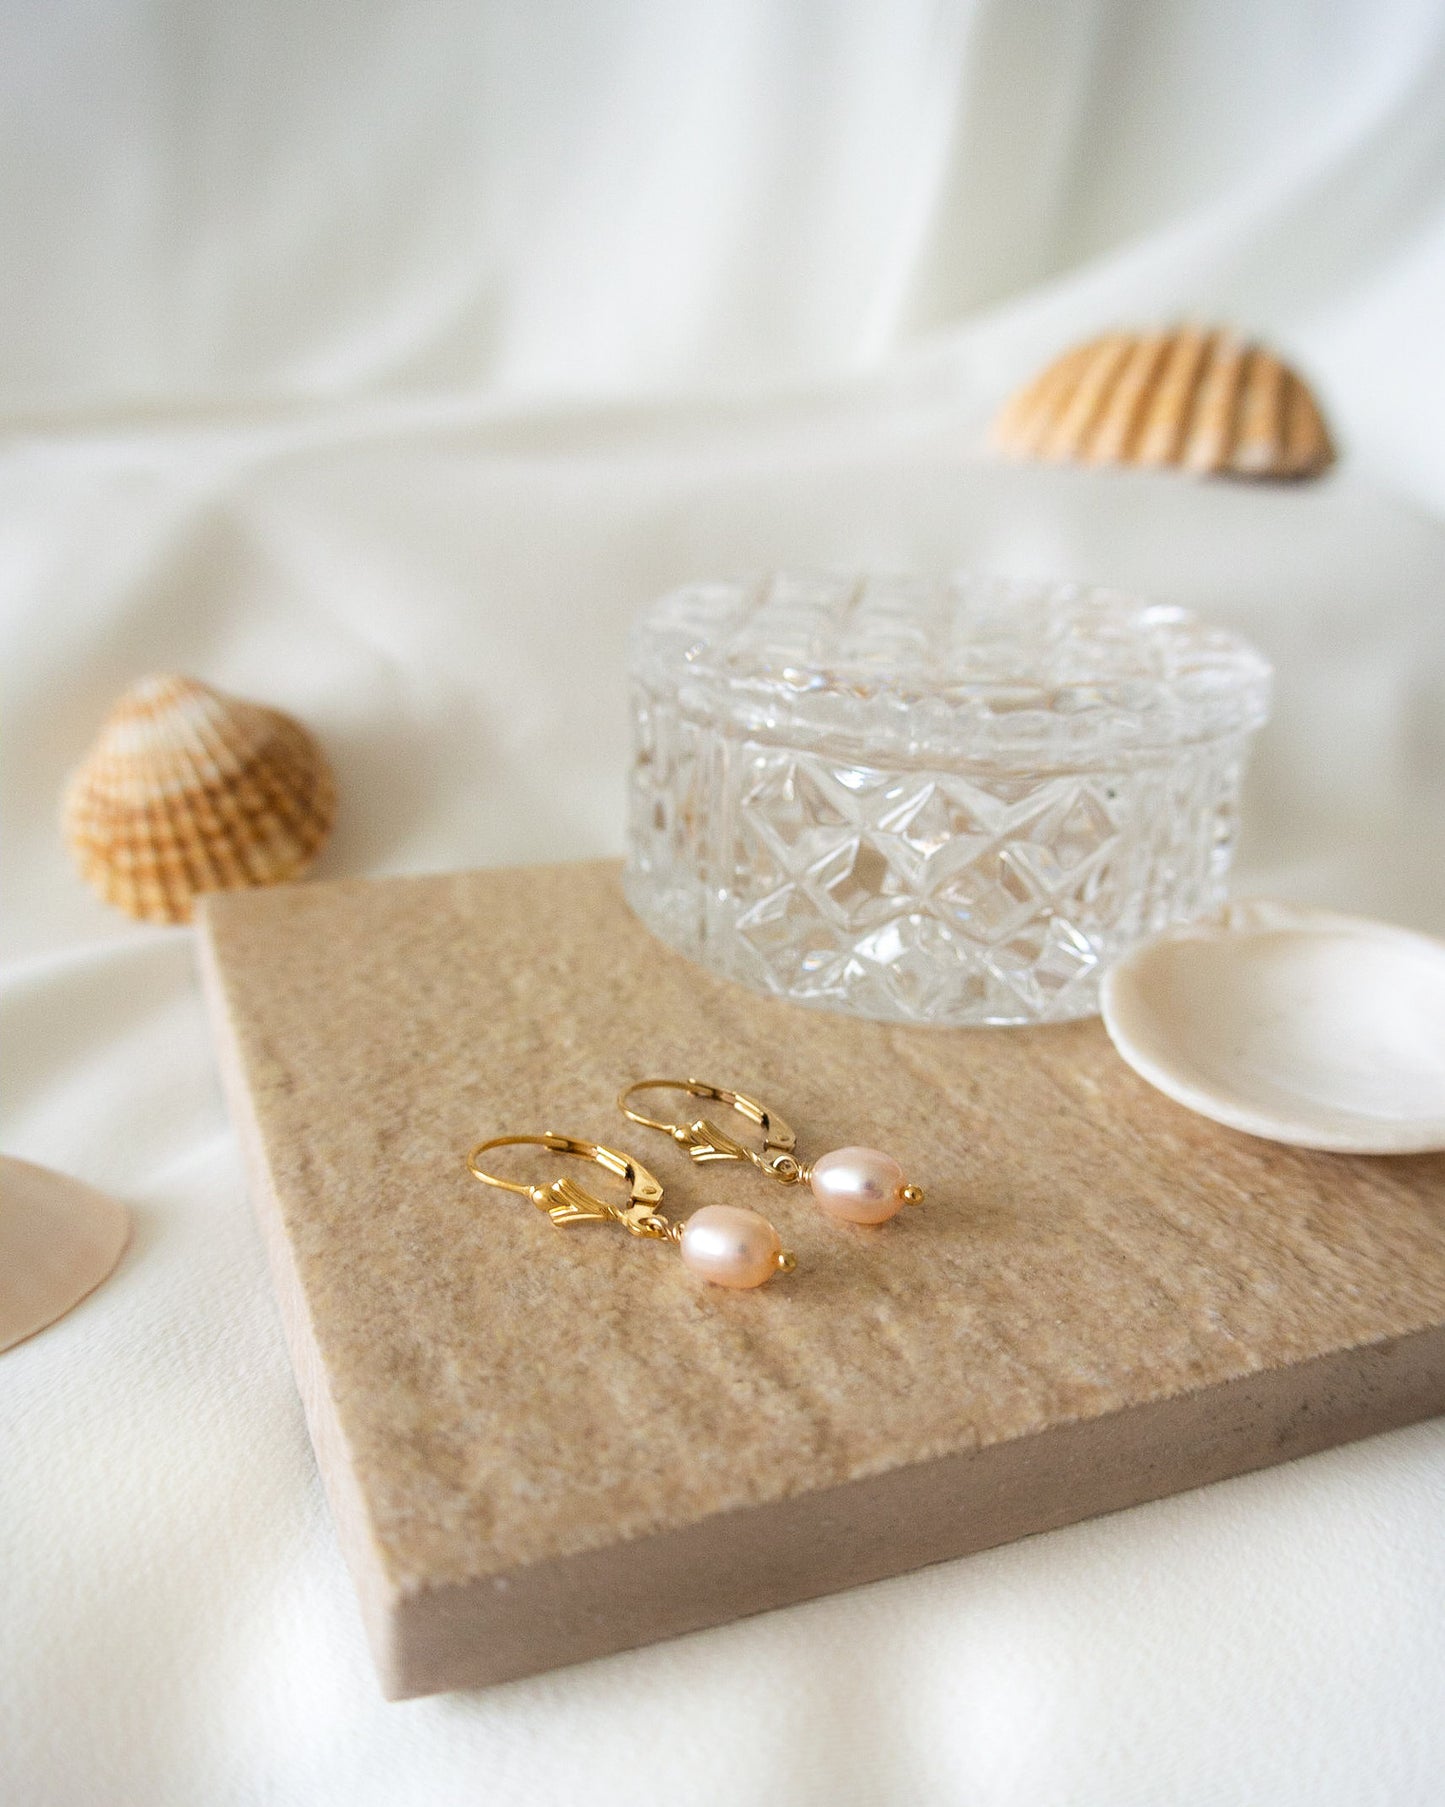 14K Gold Filled Peach Pearl Earrings | Inspiration Her Jewellery